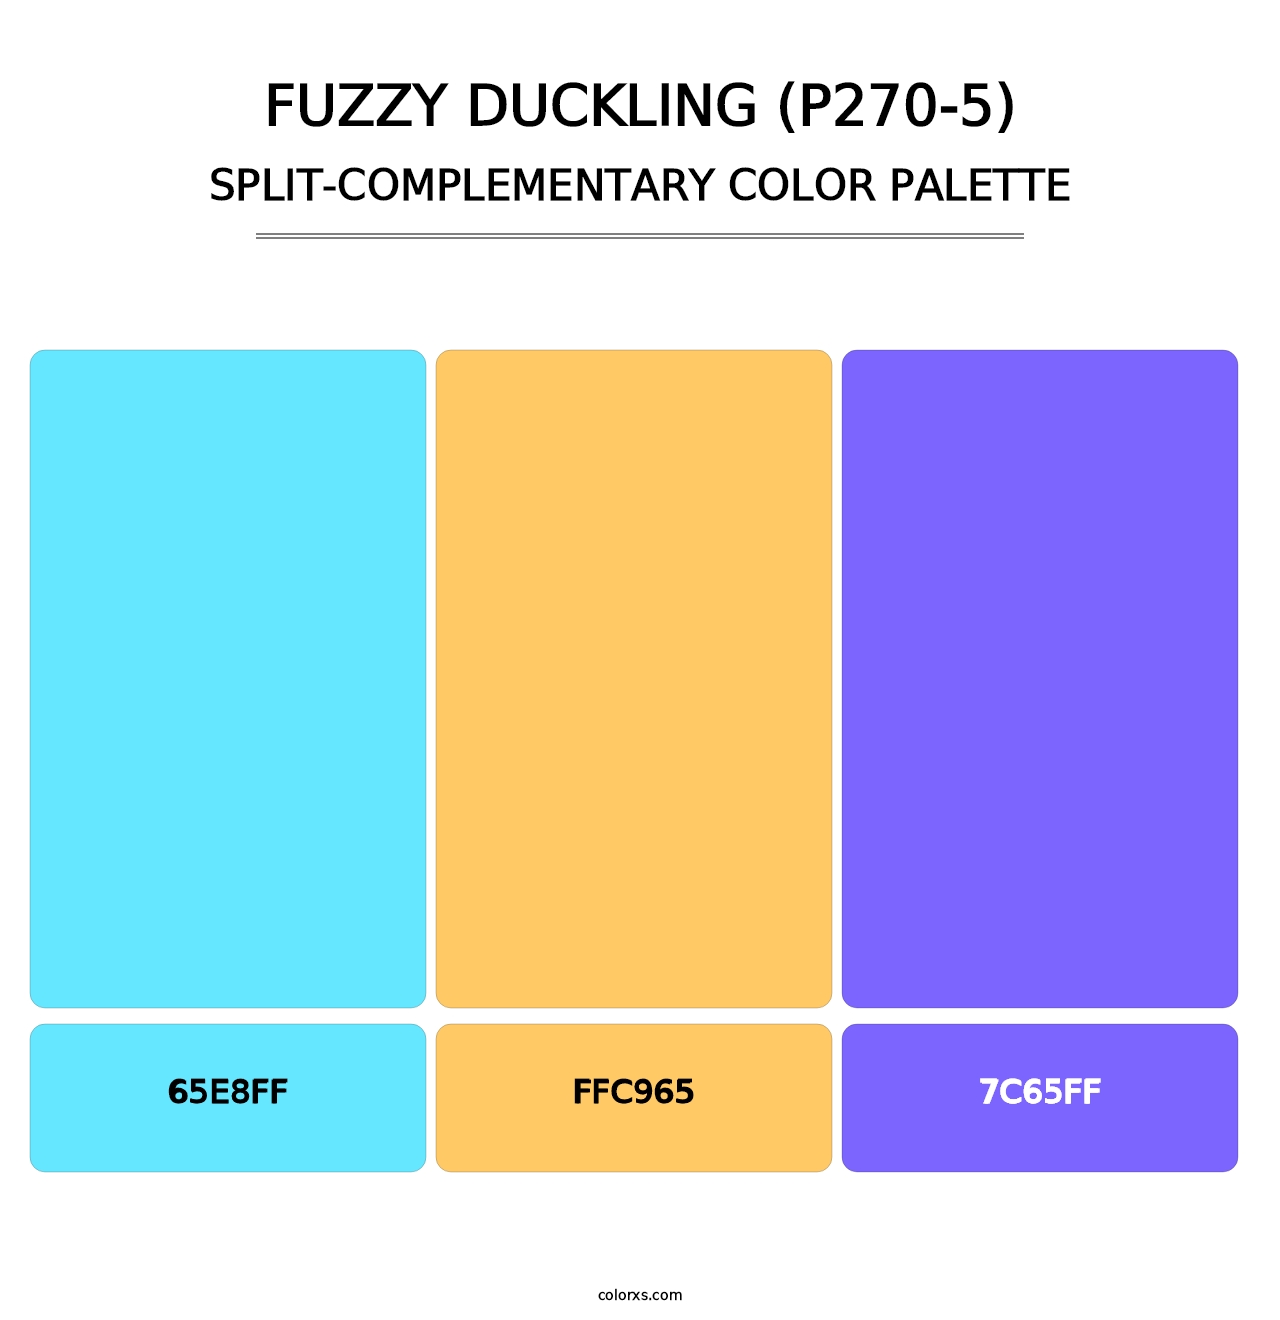 Fuzzy Duckling (P270-5) - Split-Complementary Color Palette